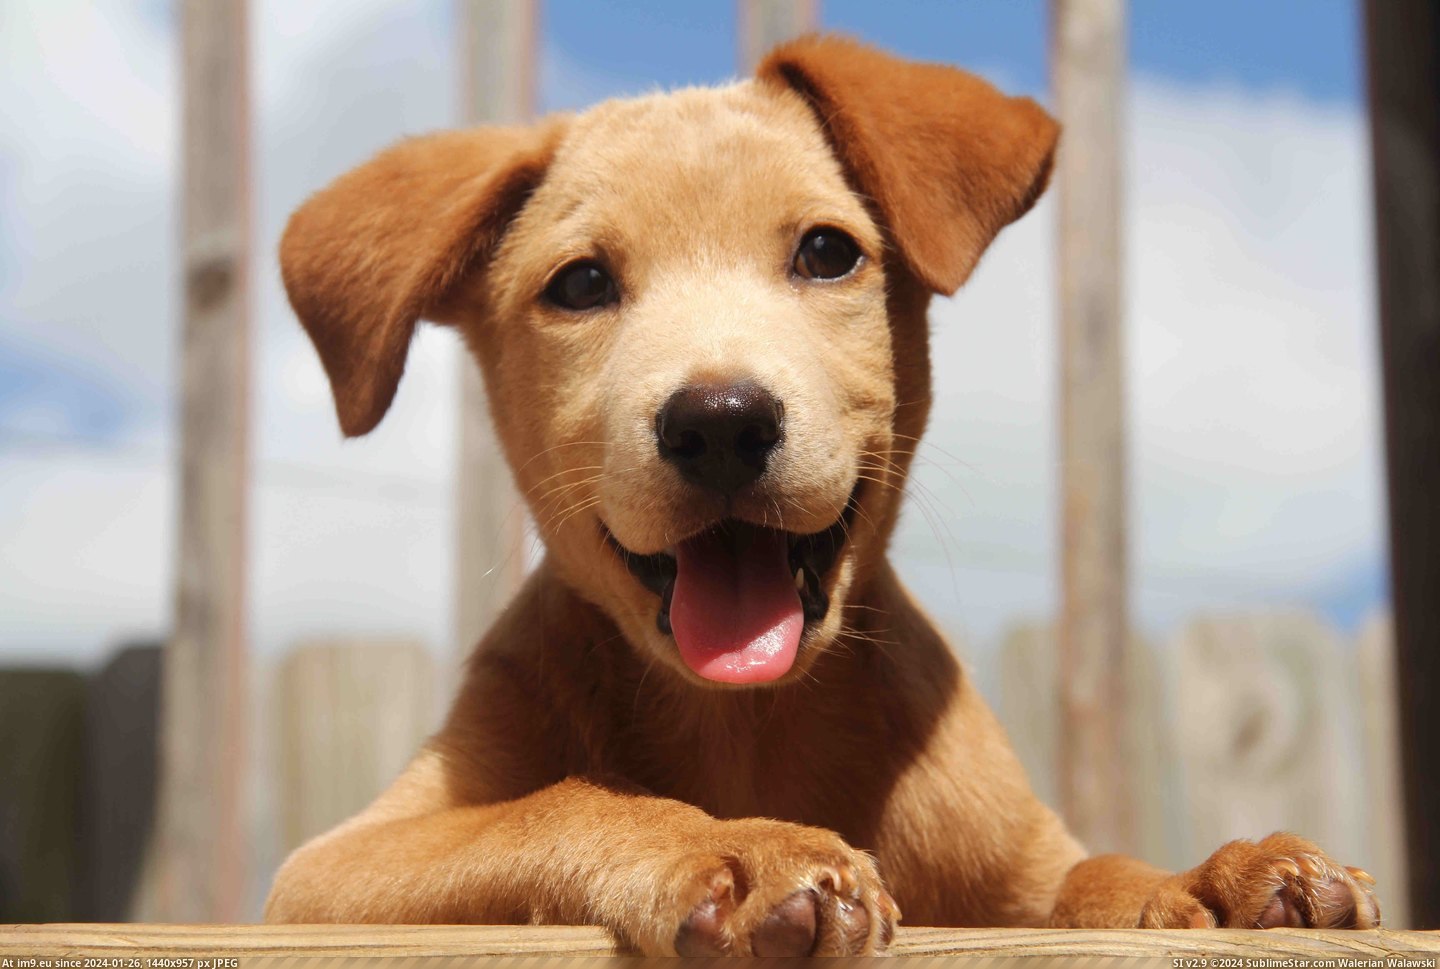 #Cute #Wallpaper #Happy #Dog #Pup #Extremely #Photogenic #Sweet #Smile #Puppy #Highres [Aww] Extremely photogenic puppy:) Pic. (Изображение из альбом My r/AWW favs))